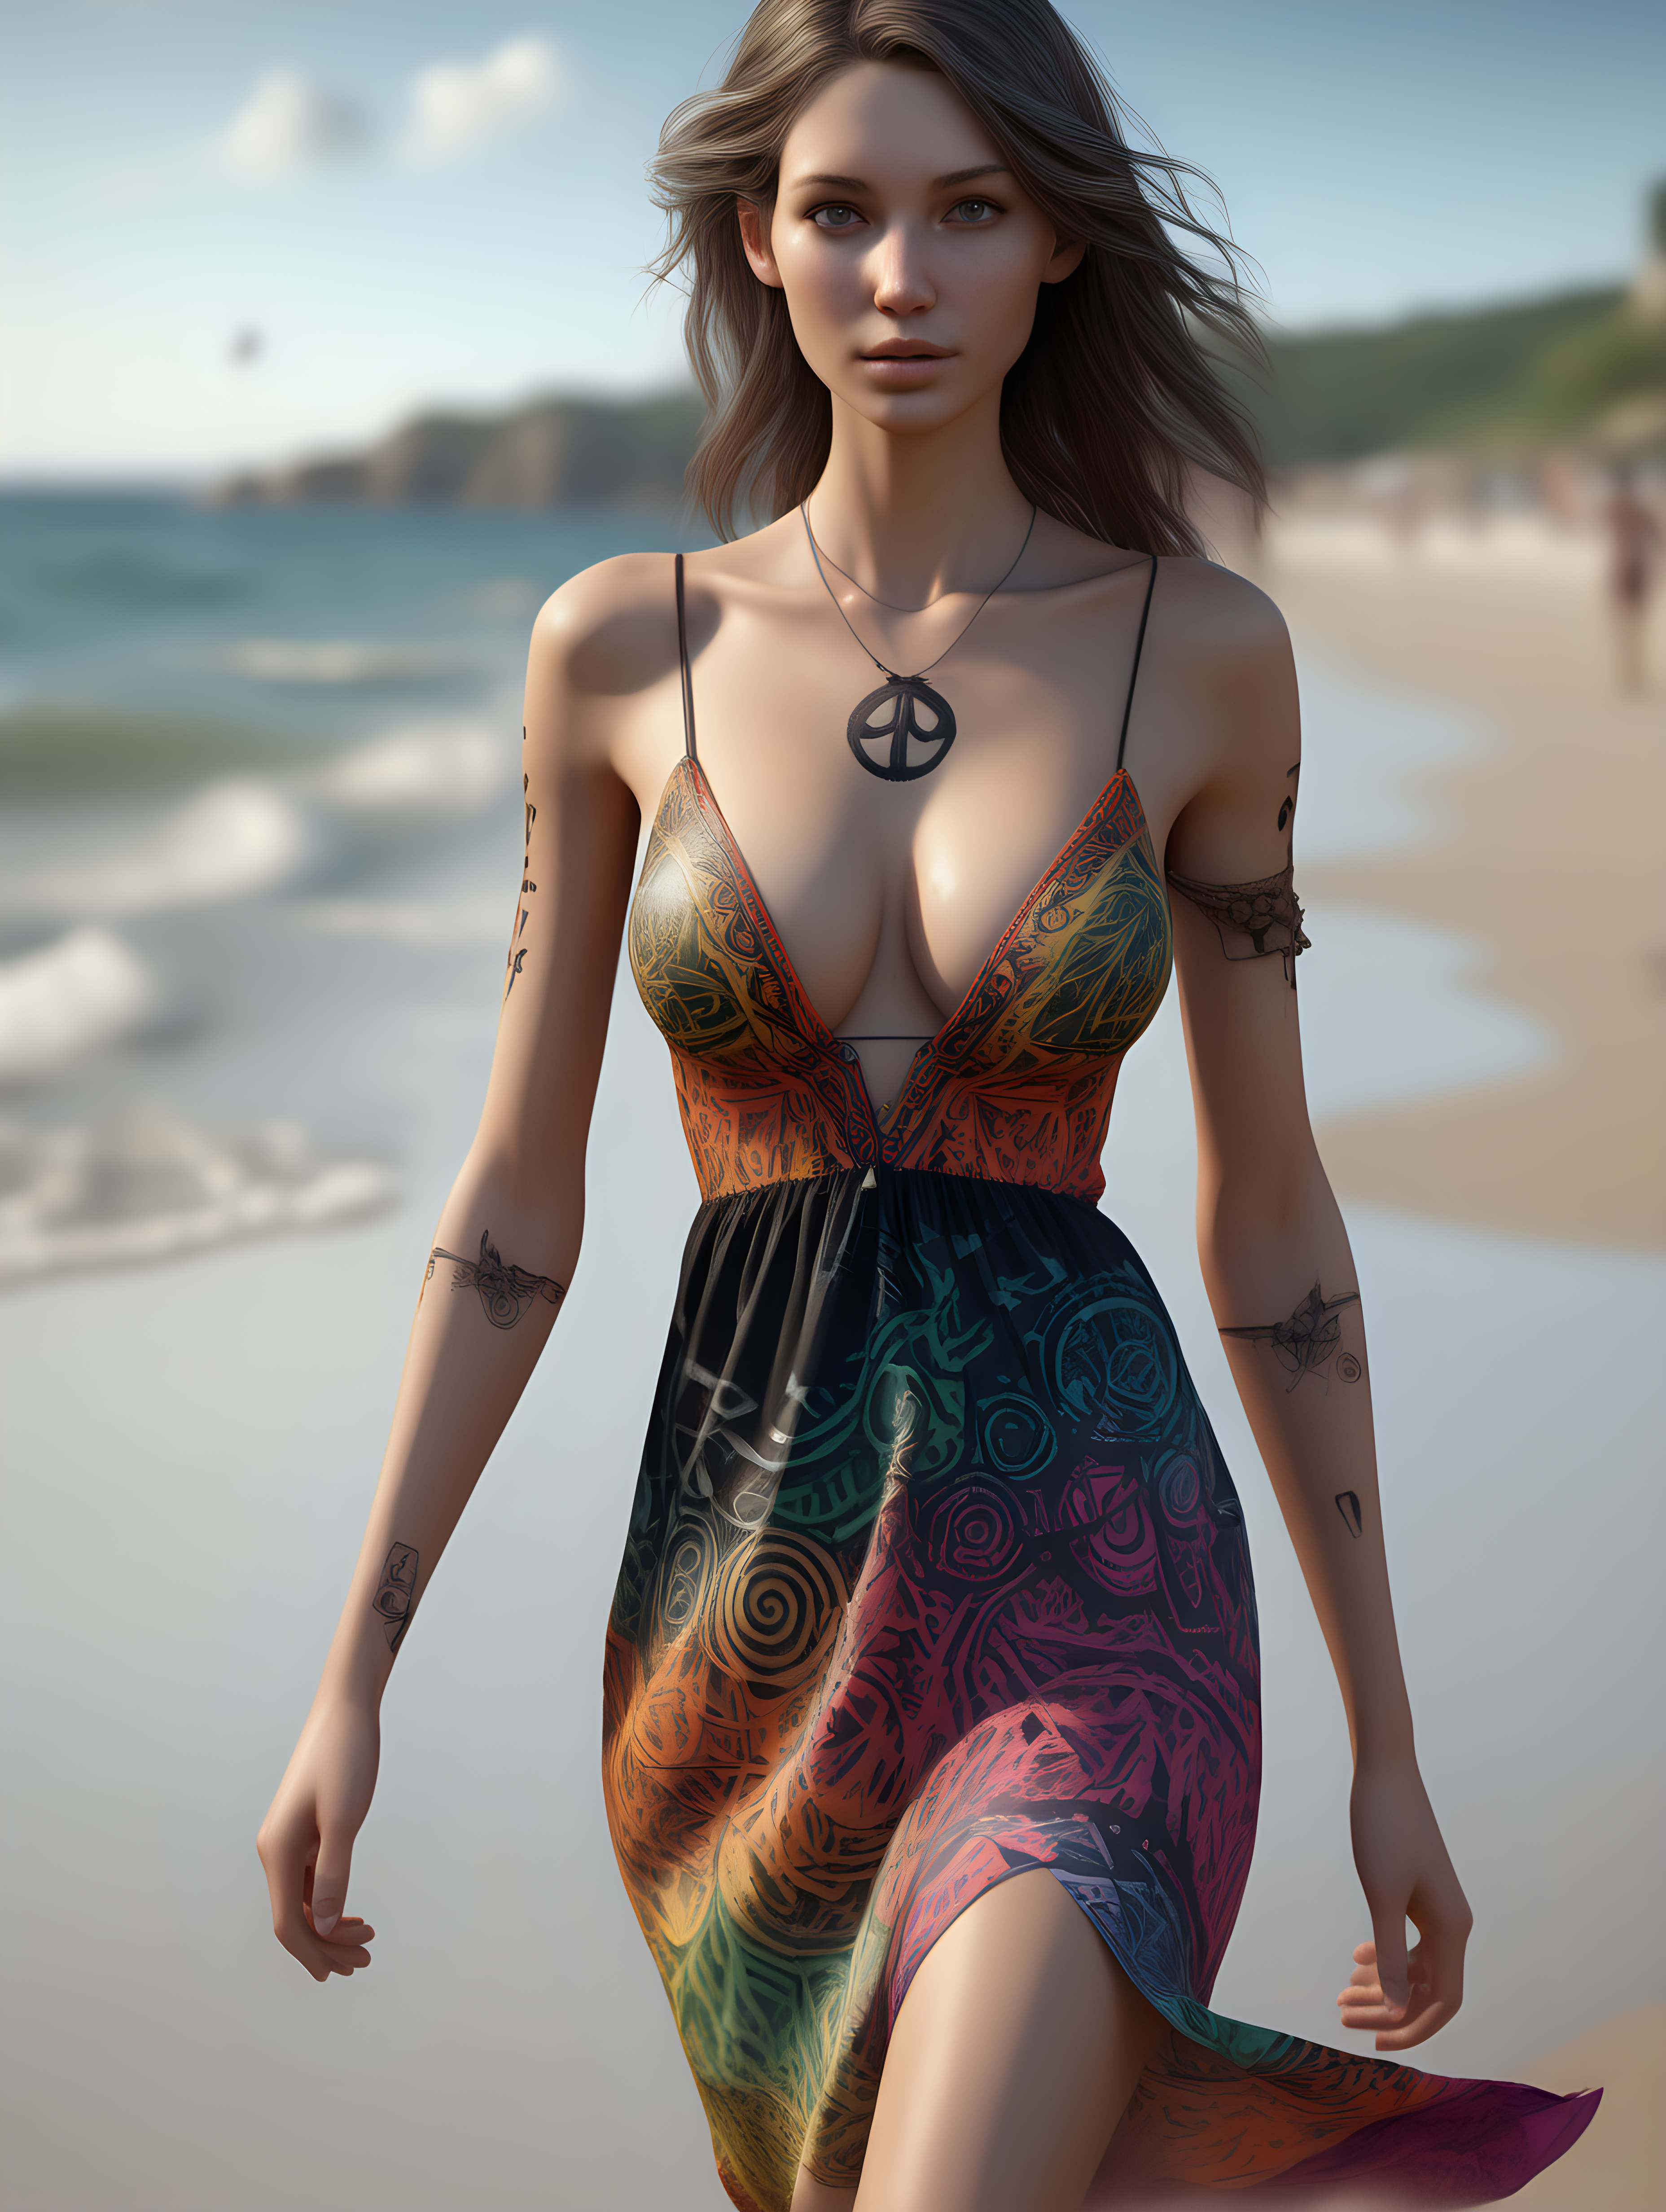 ultra-realistic high resolution and highly detailed photo of a slender female human with large firm breasts, she has black draconic symbols carved into her arms and body, wearing a colourful loose summer dress, walking on a beach facing the camera